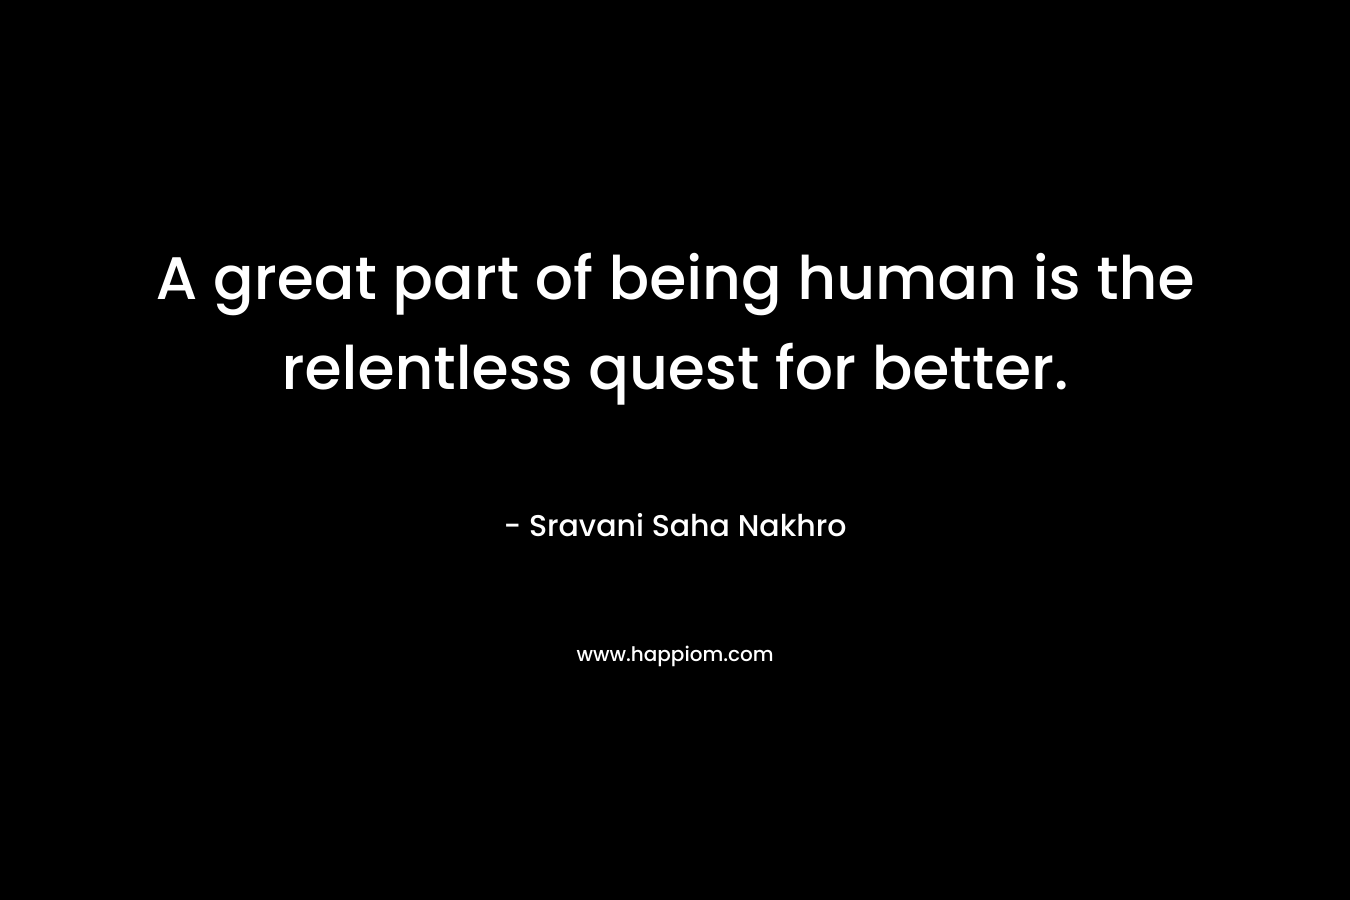 A great part of being human is the relentless quest for better.